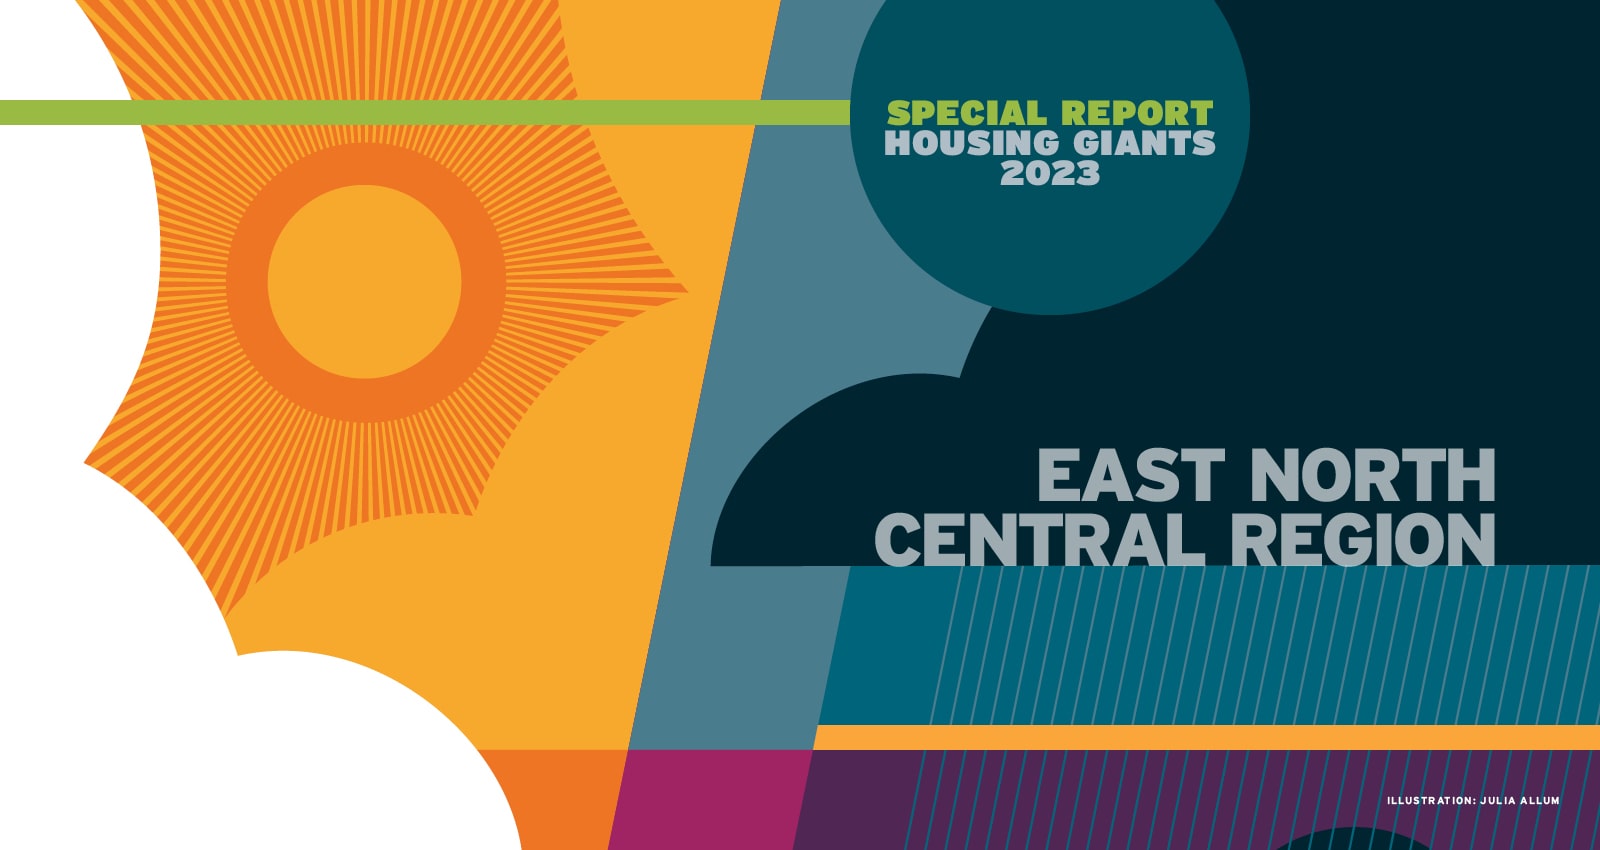 2023 Housing Giants ranked list of top builders in the East North Central region